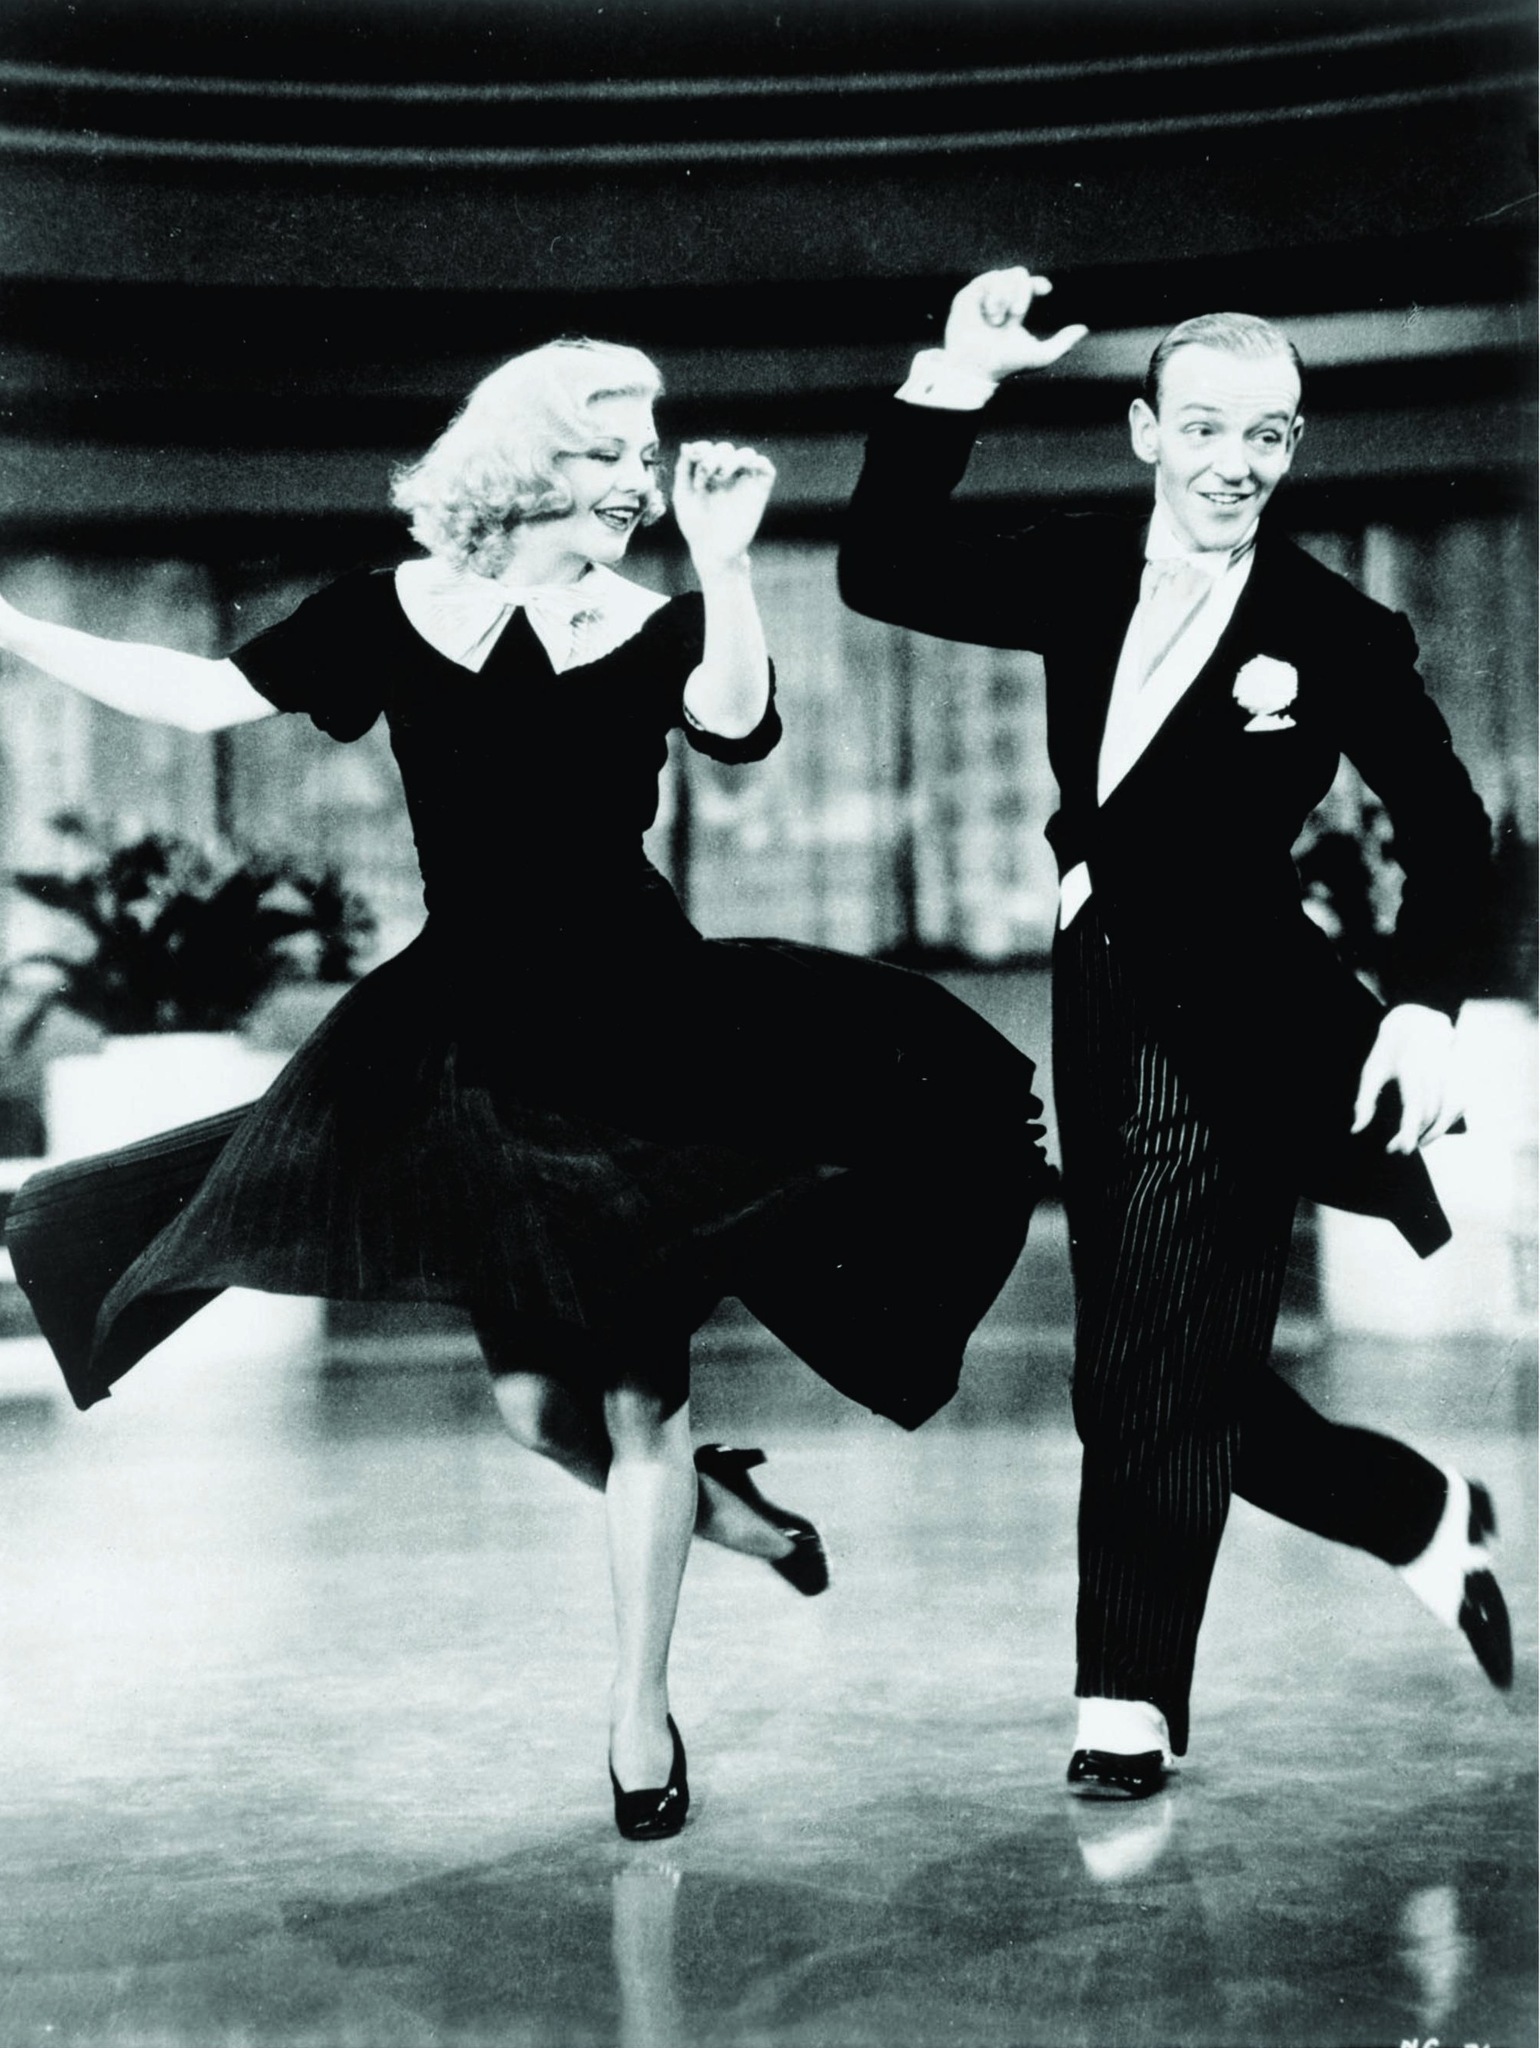 Still of Fred Astaire and Ginger Rogers in Swing Time (1936)